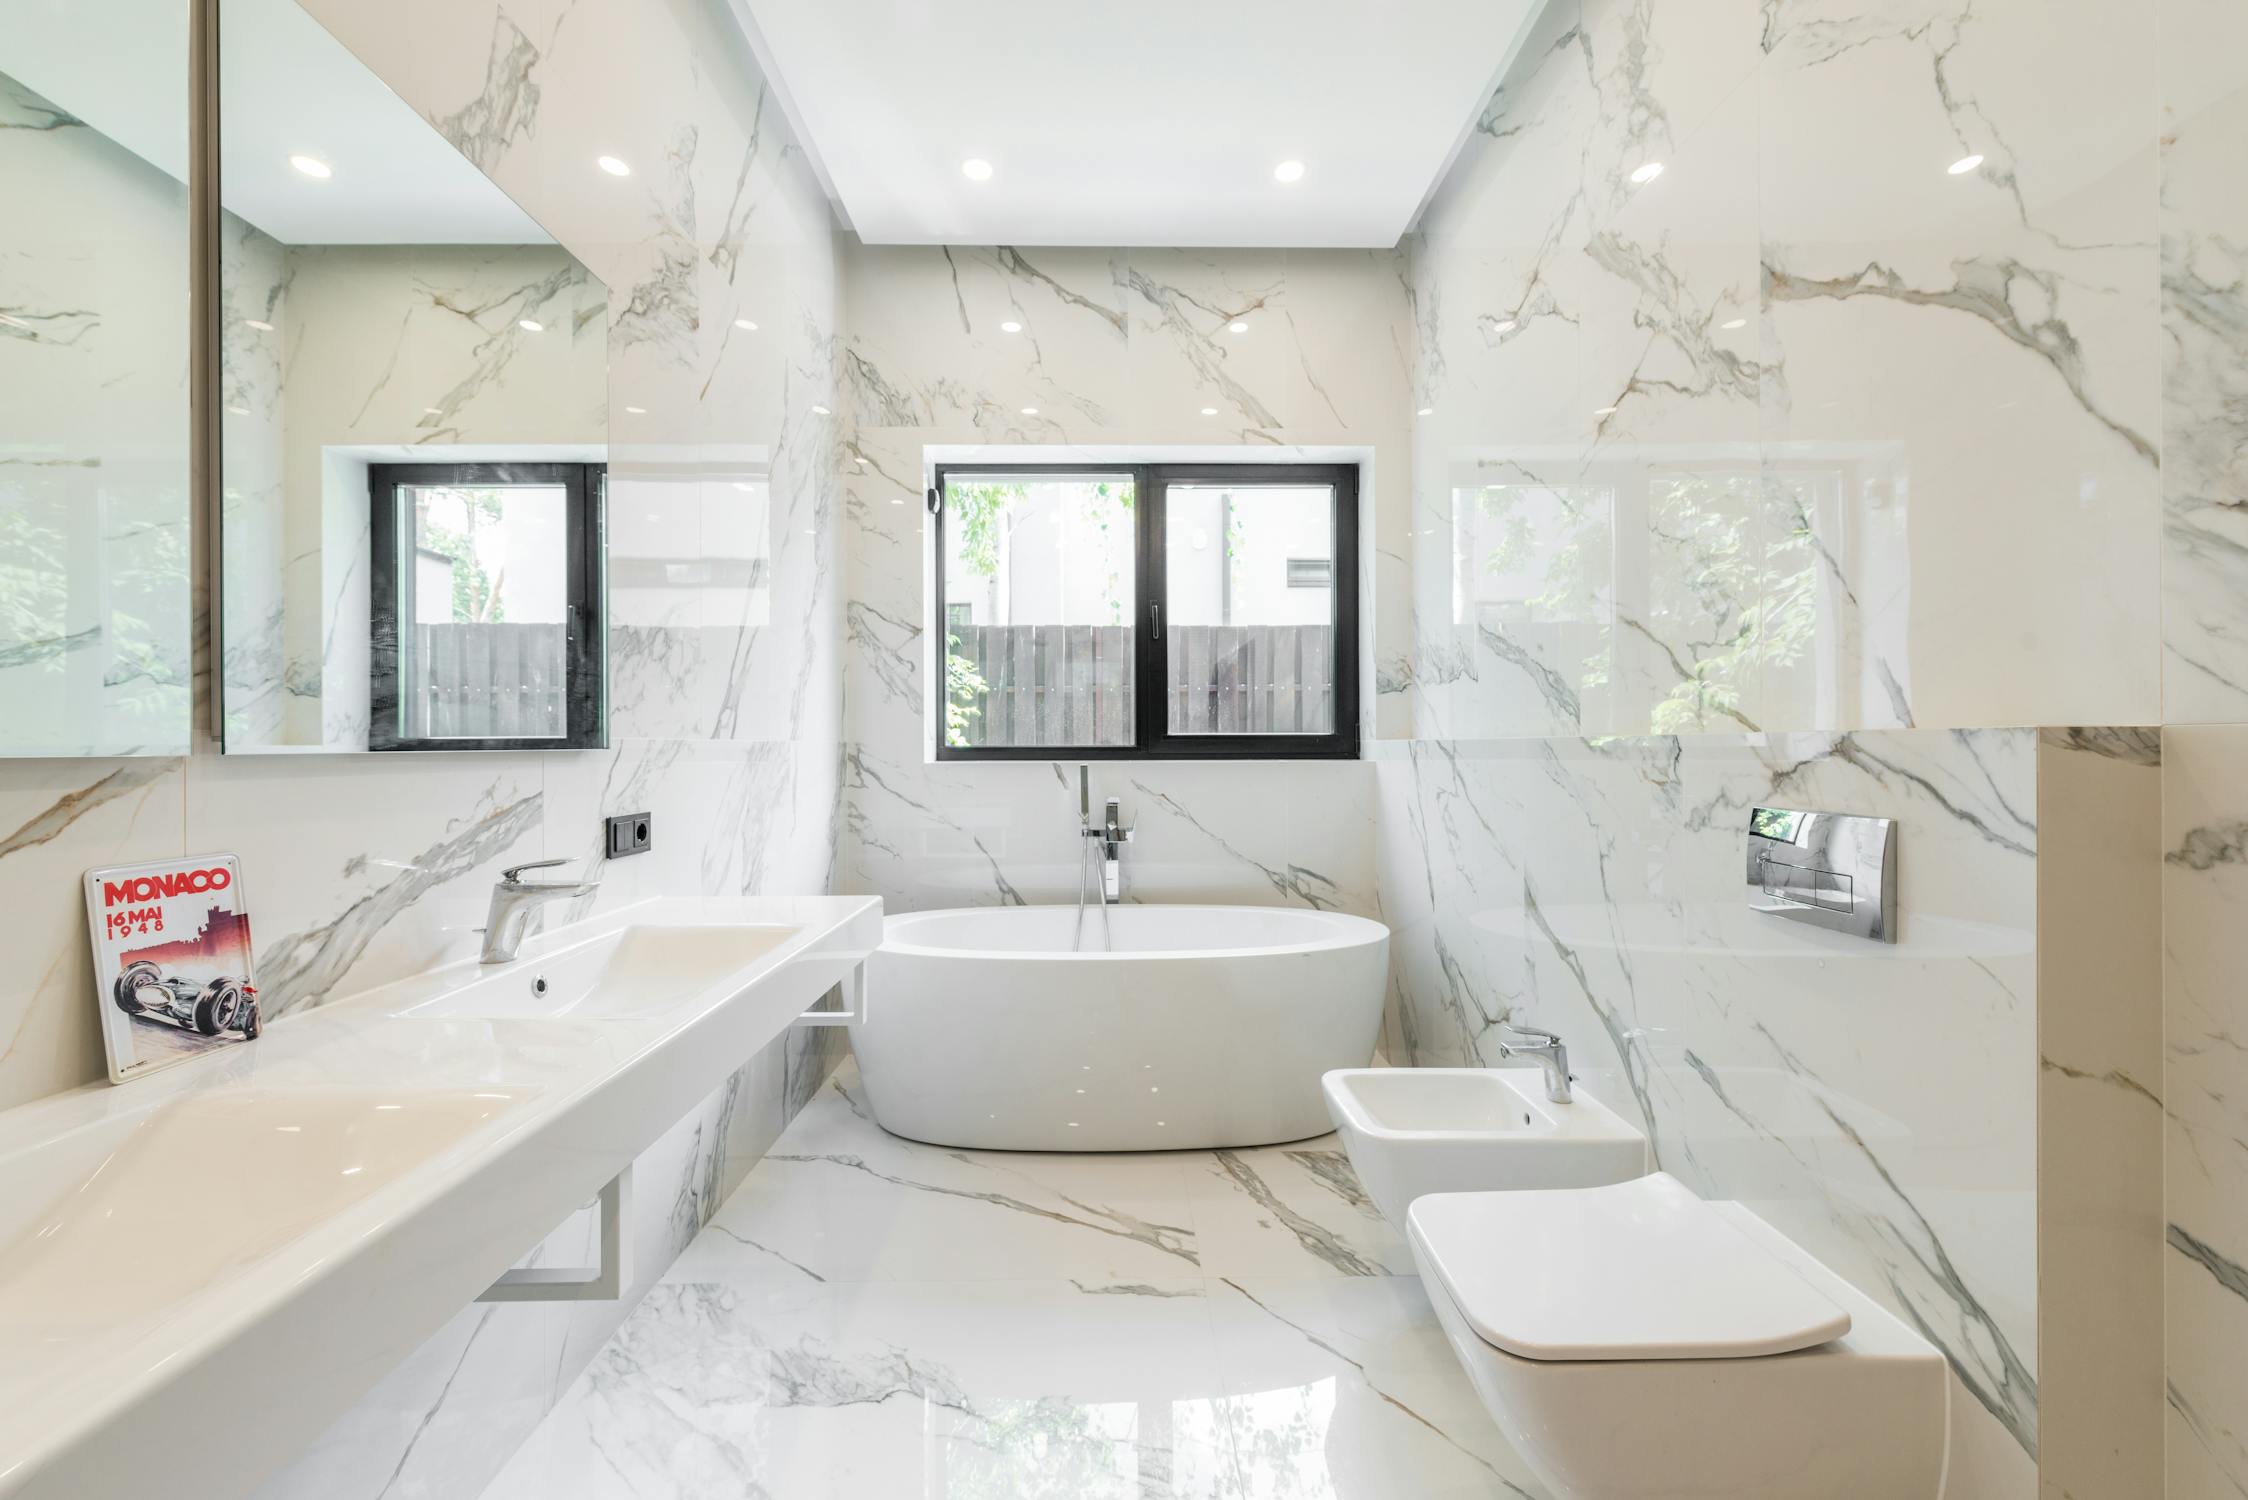 An image of bathroom remodeling services